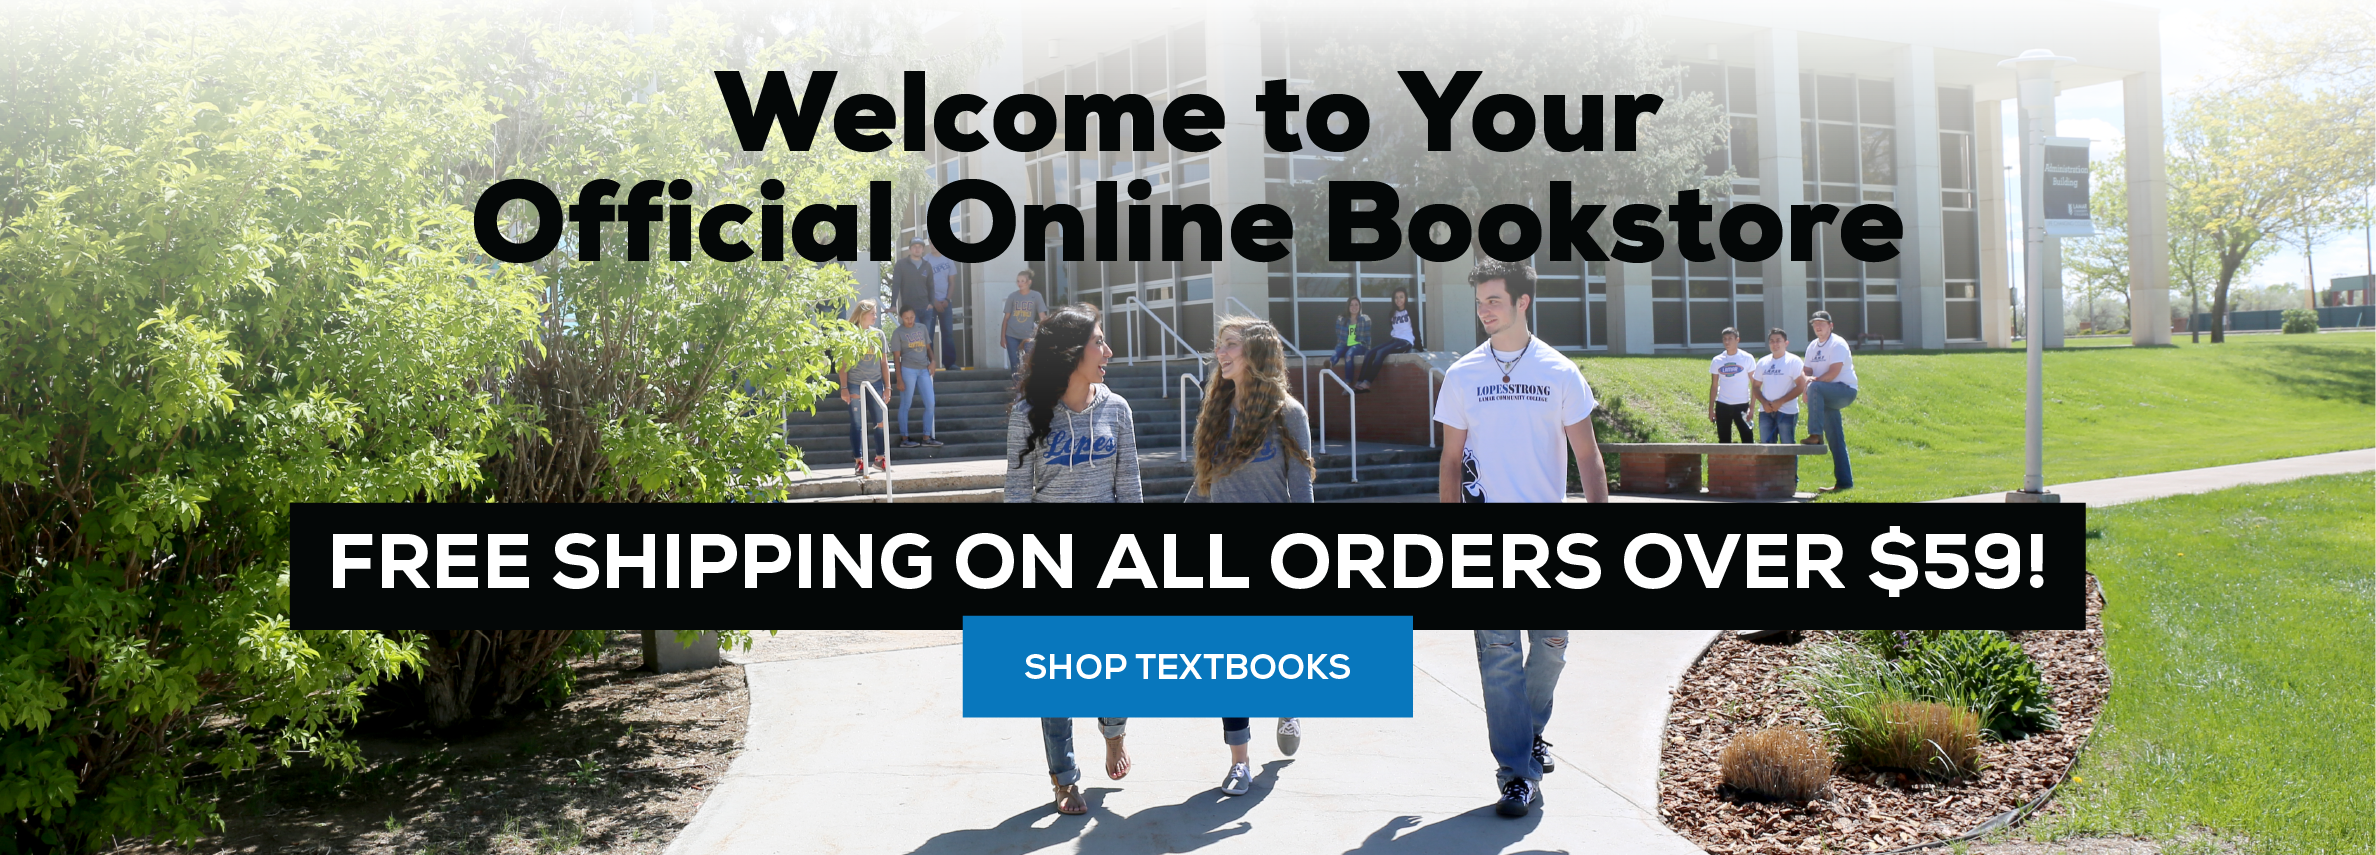 Welcome to your official online bookstore. Free shipping on all orders over $59! (new tab)